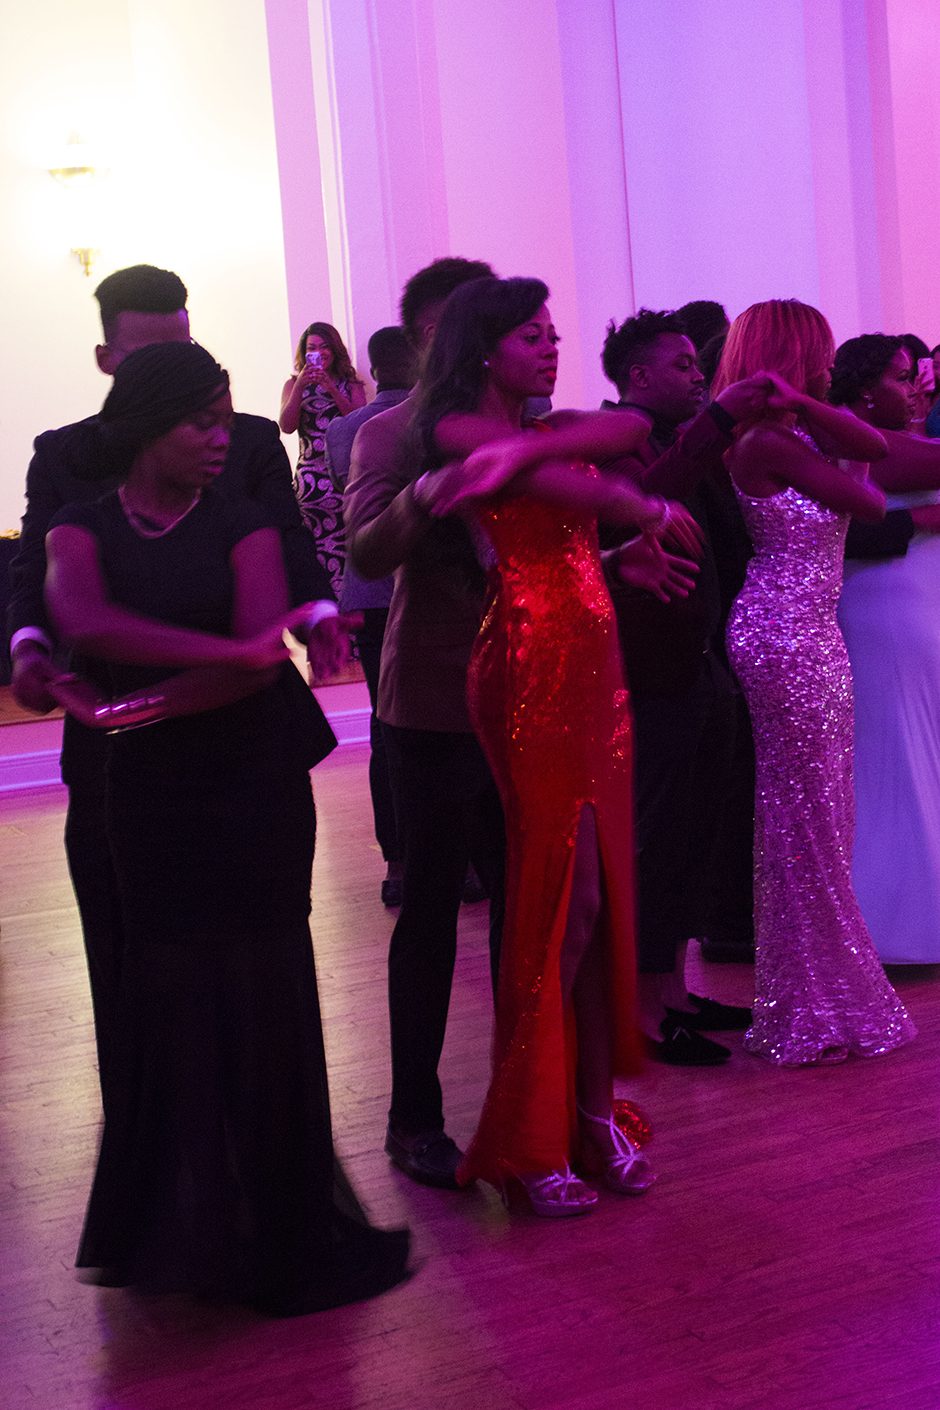 Attendees at the LBC Homecoming Black Tourmaline Ball have some fun on the dance floor. Photo by Ymani Wince